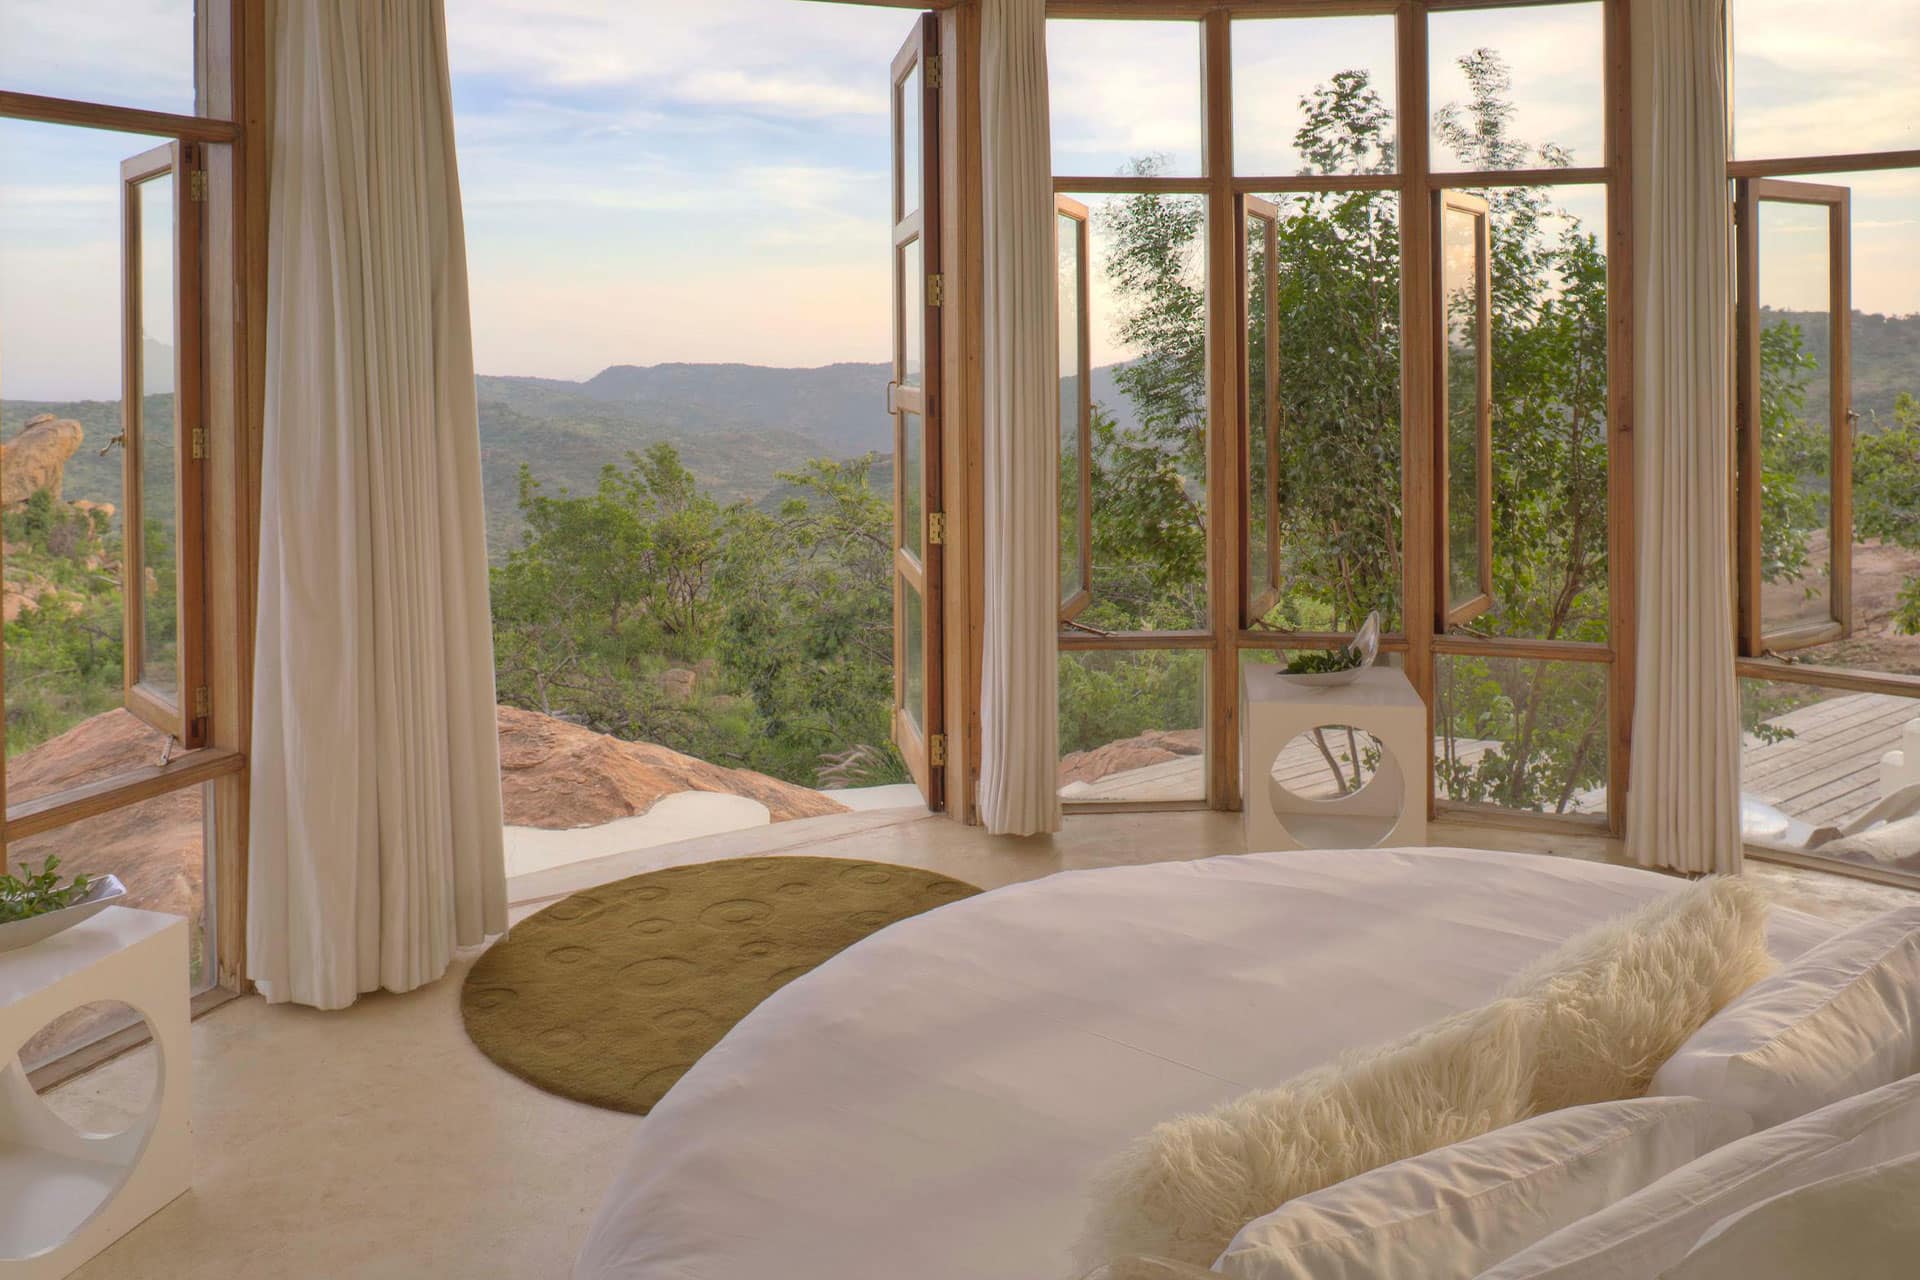 A bedroom at The Sanctuary at Ol Lentille with beautiful views of the Kenyan wilderness.